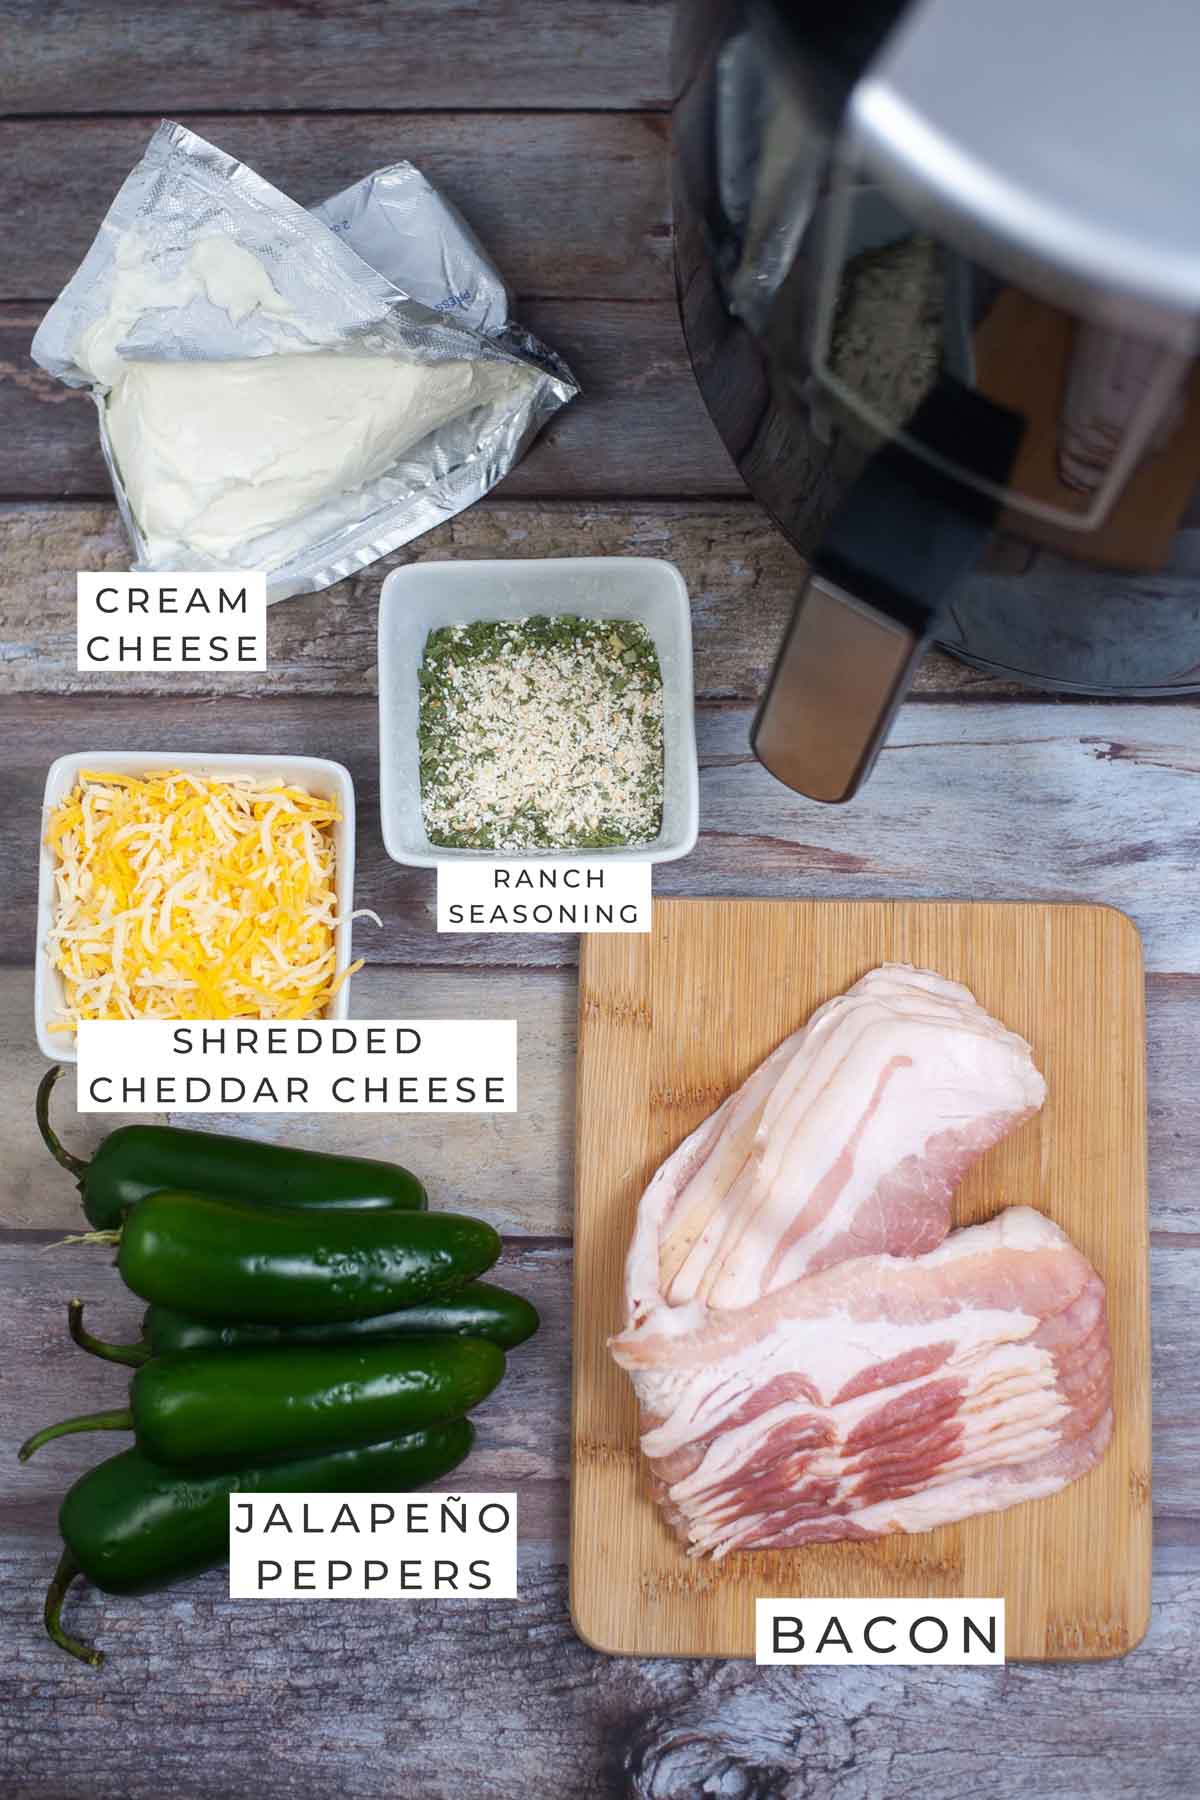 jalapeño poppers labeled ingredients.